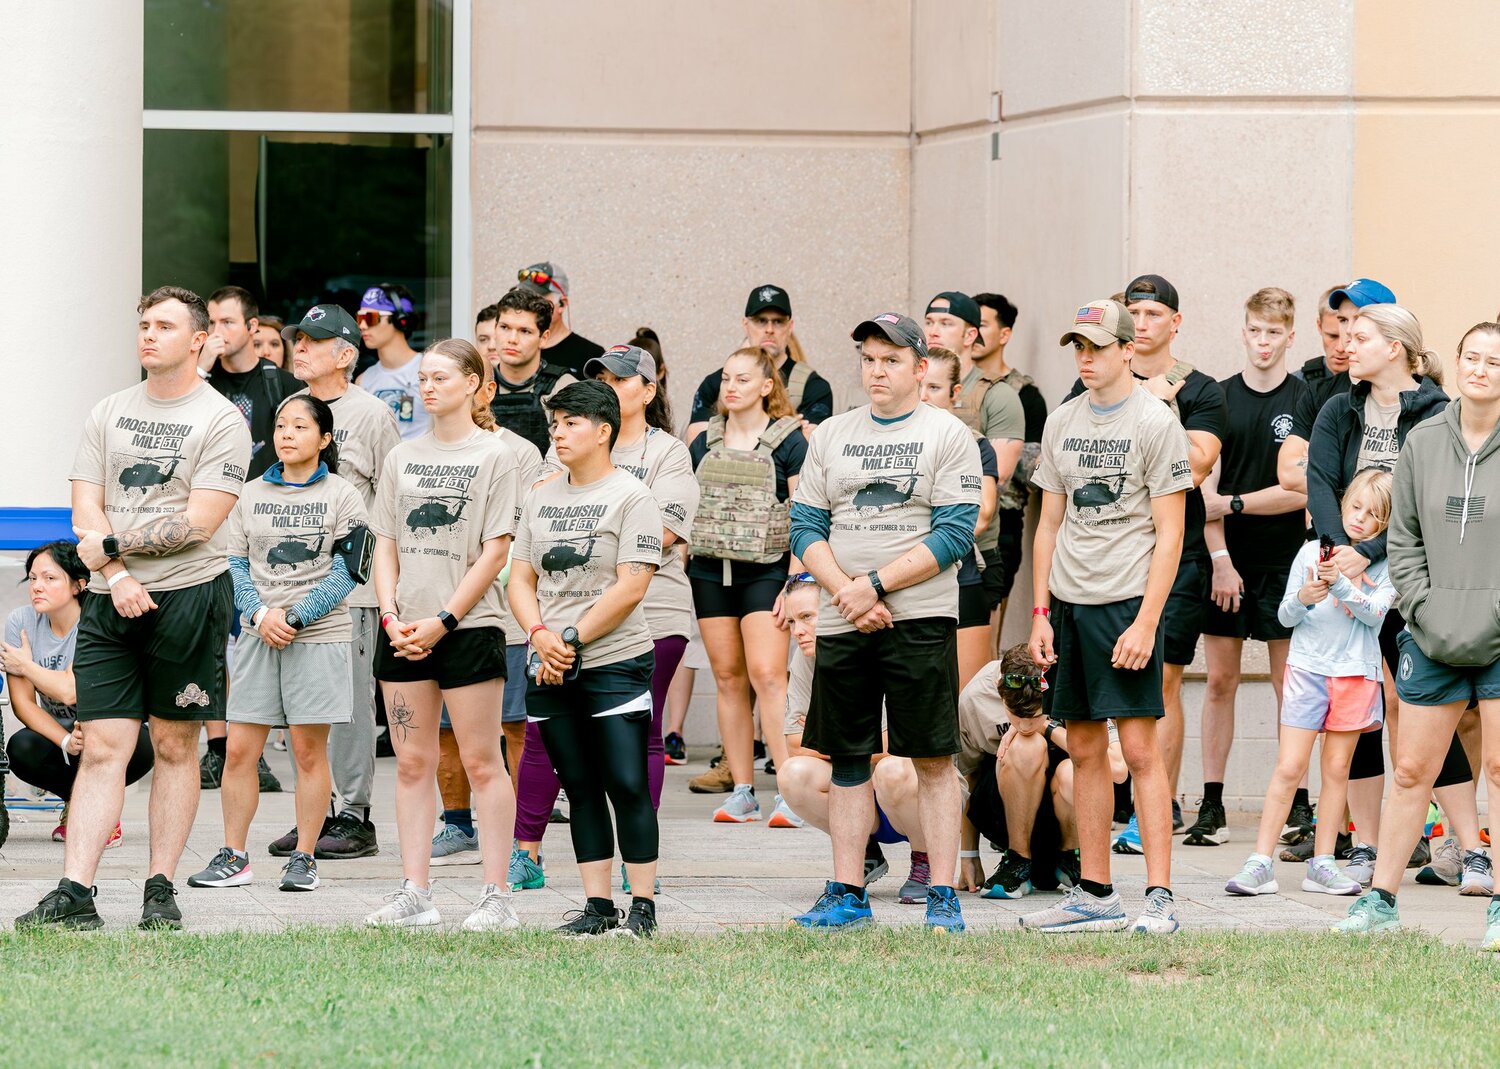 Mogadishu Mile 5K, hosted by the Airborne and Special Operations Museum Foundation, was held on Sept. 30.